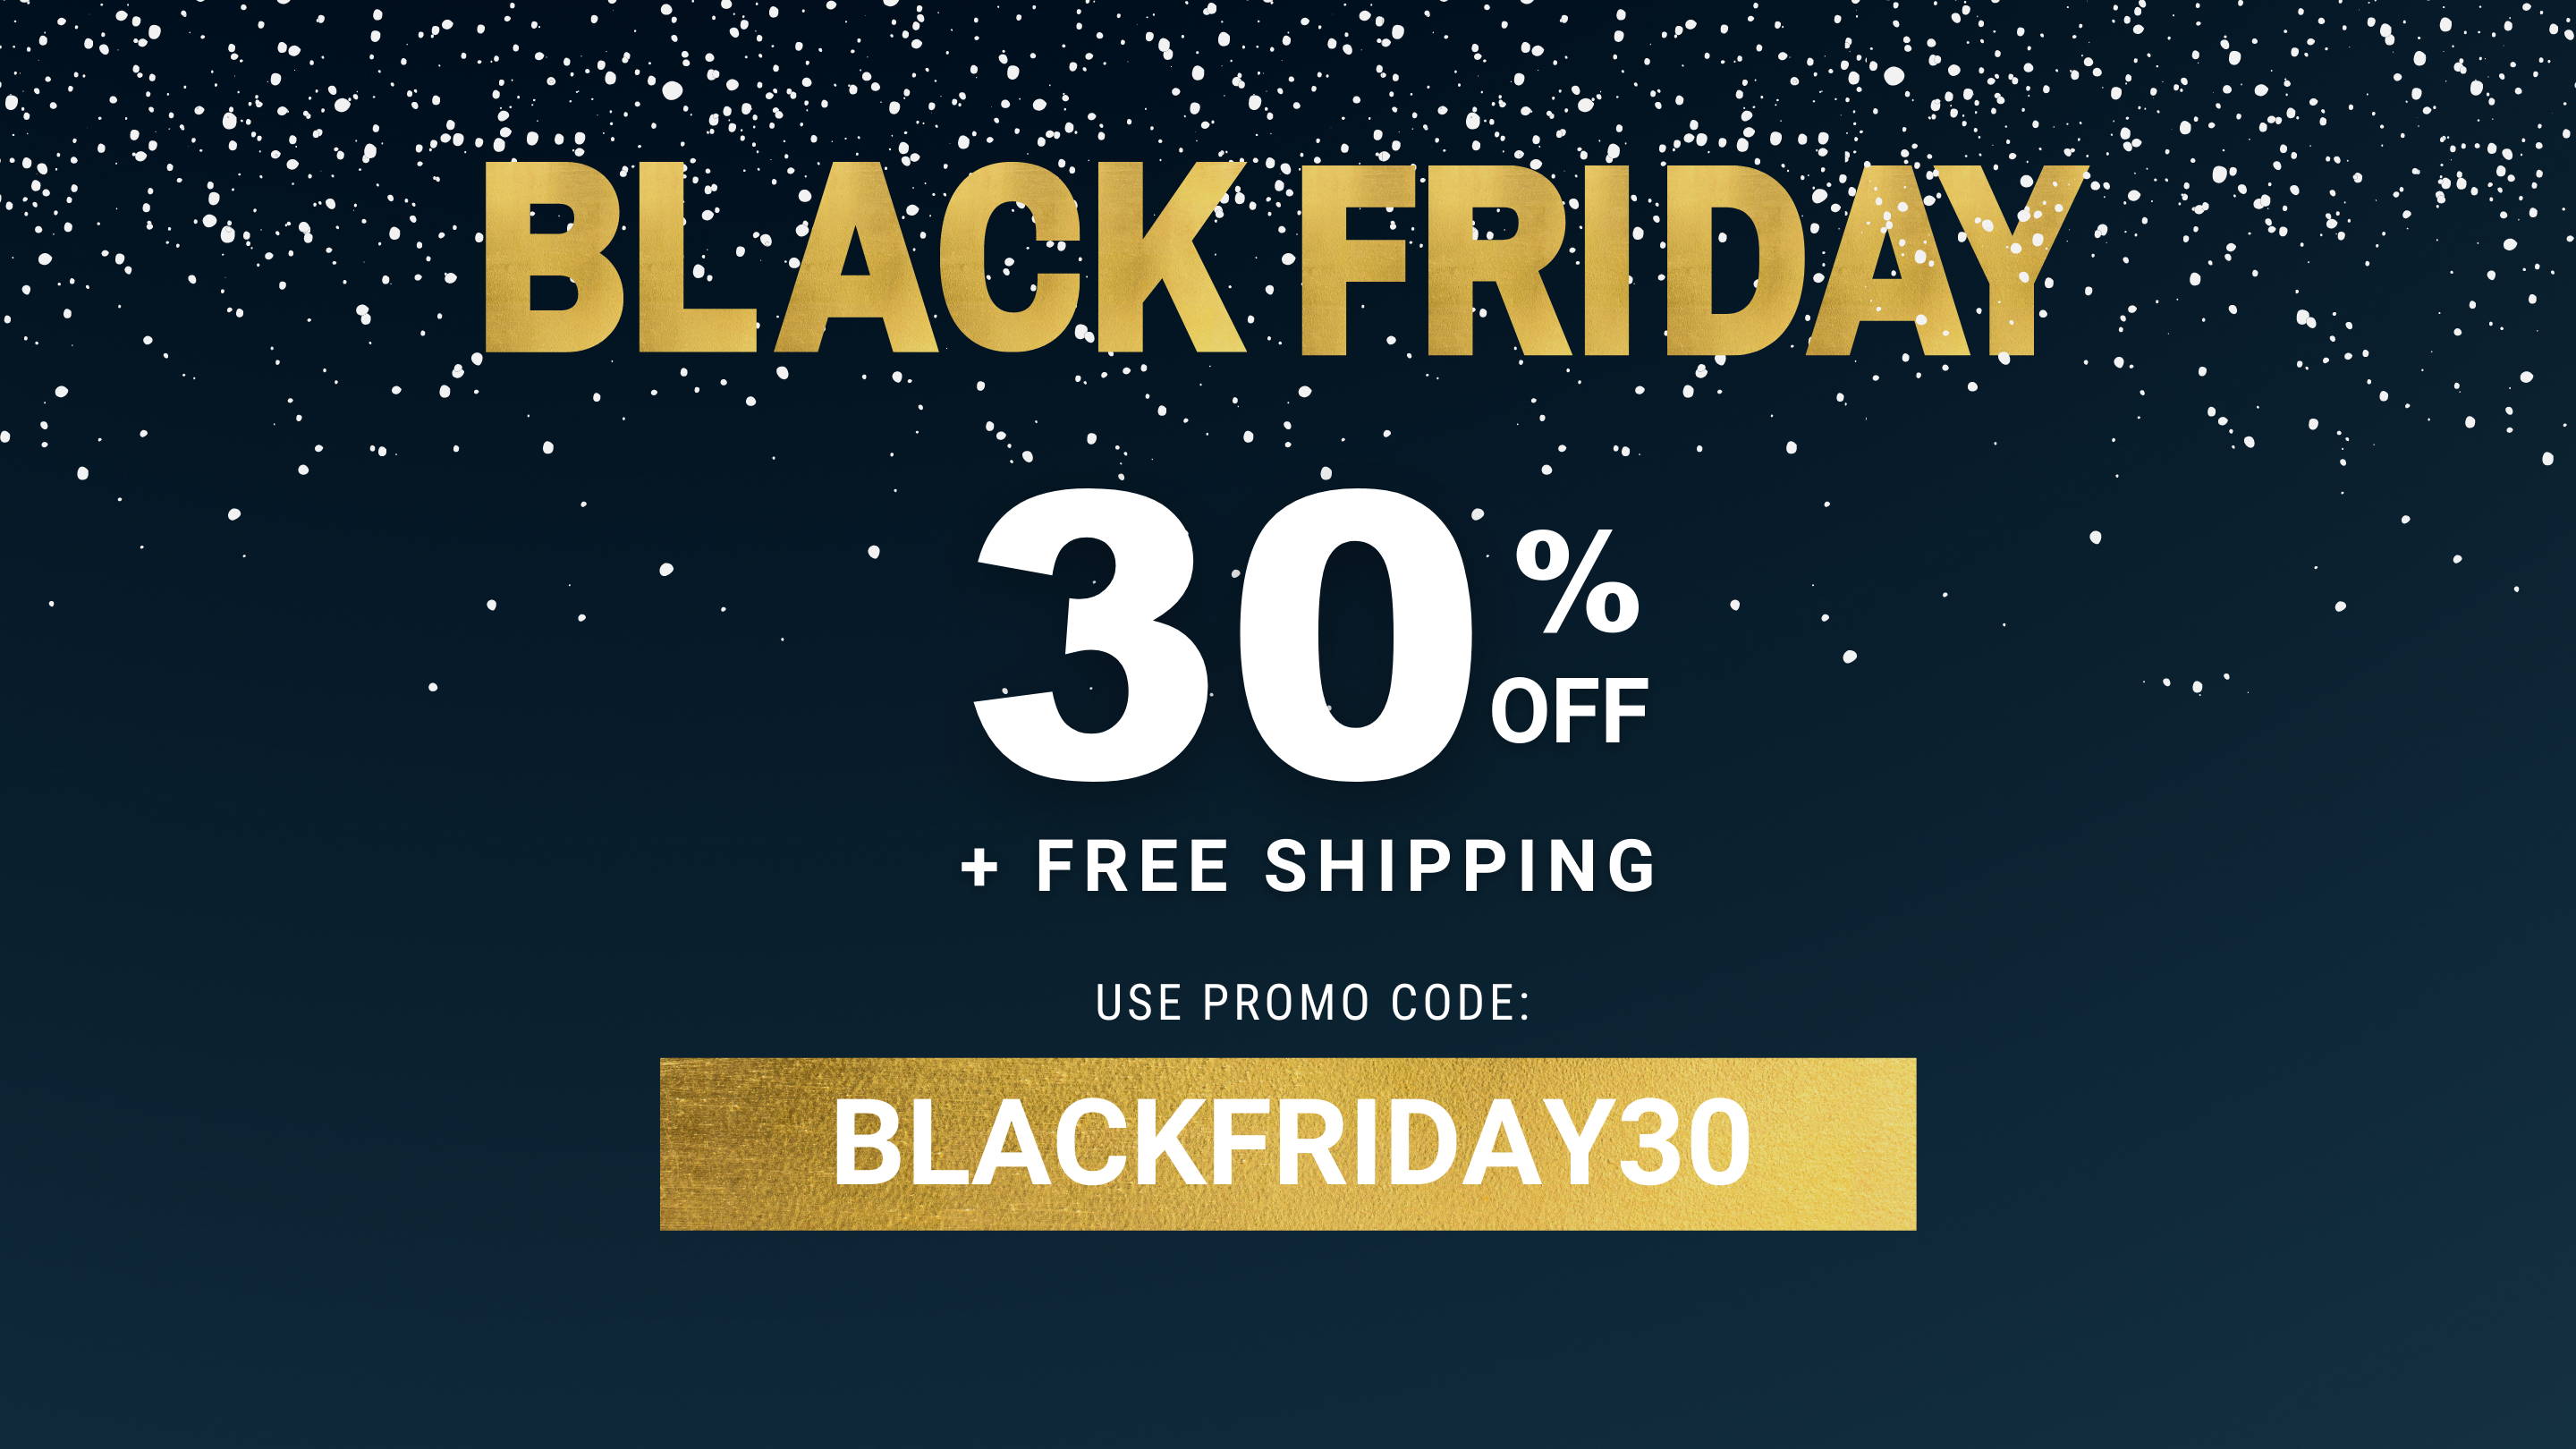 Black Friday Sale 30% off + free shipping with promo code BLACKFRIDAY30